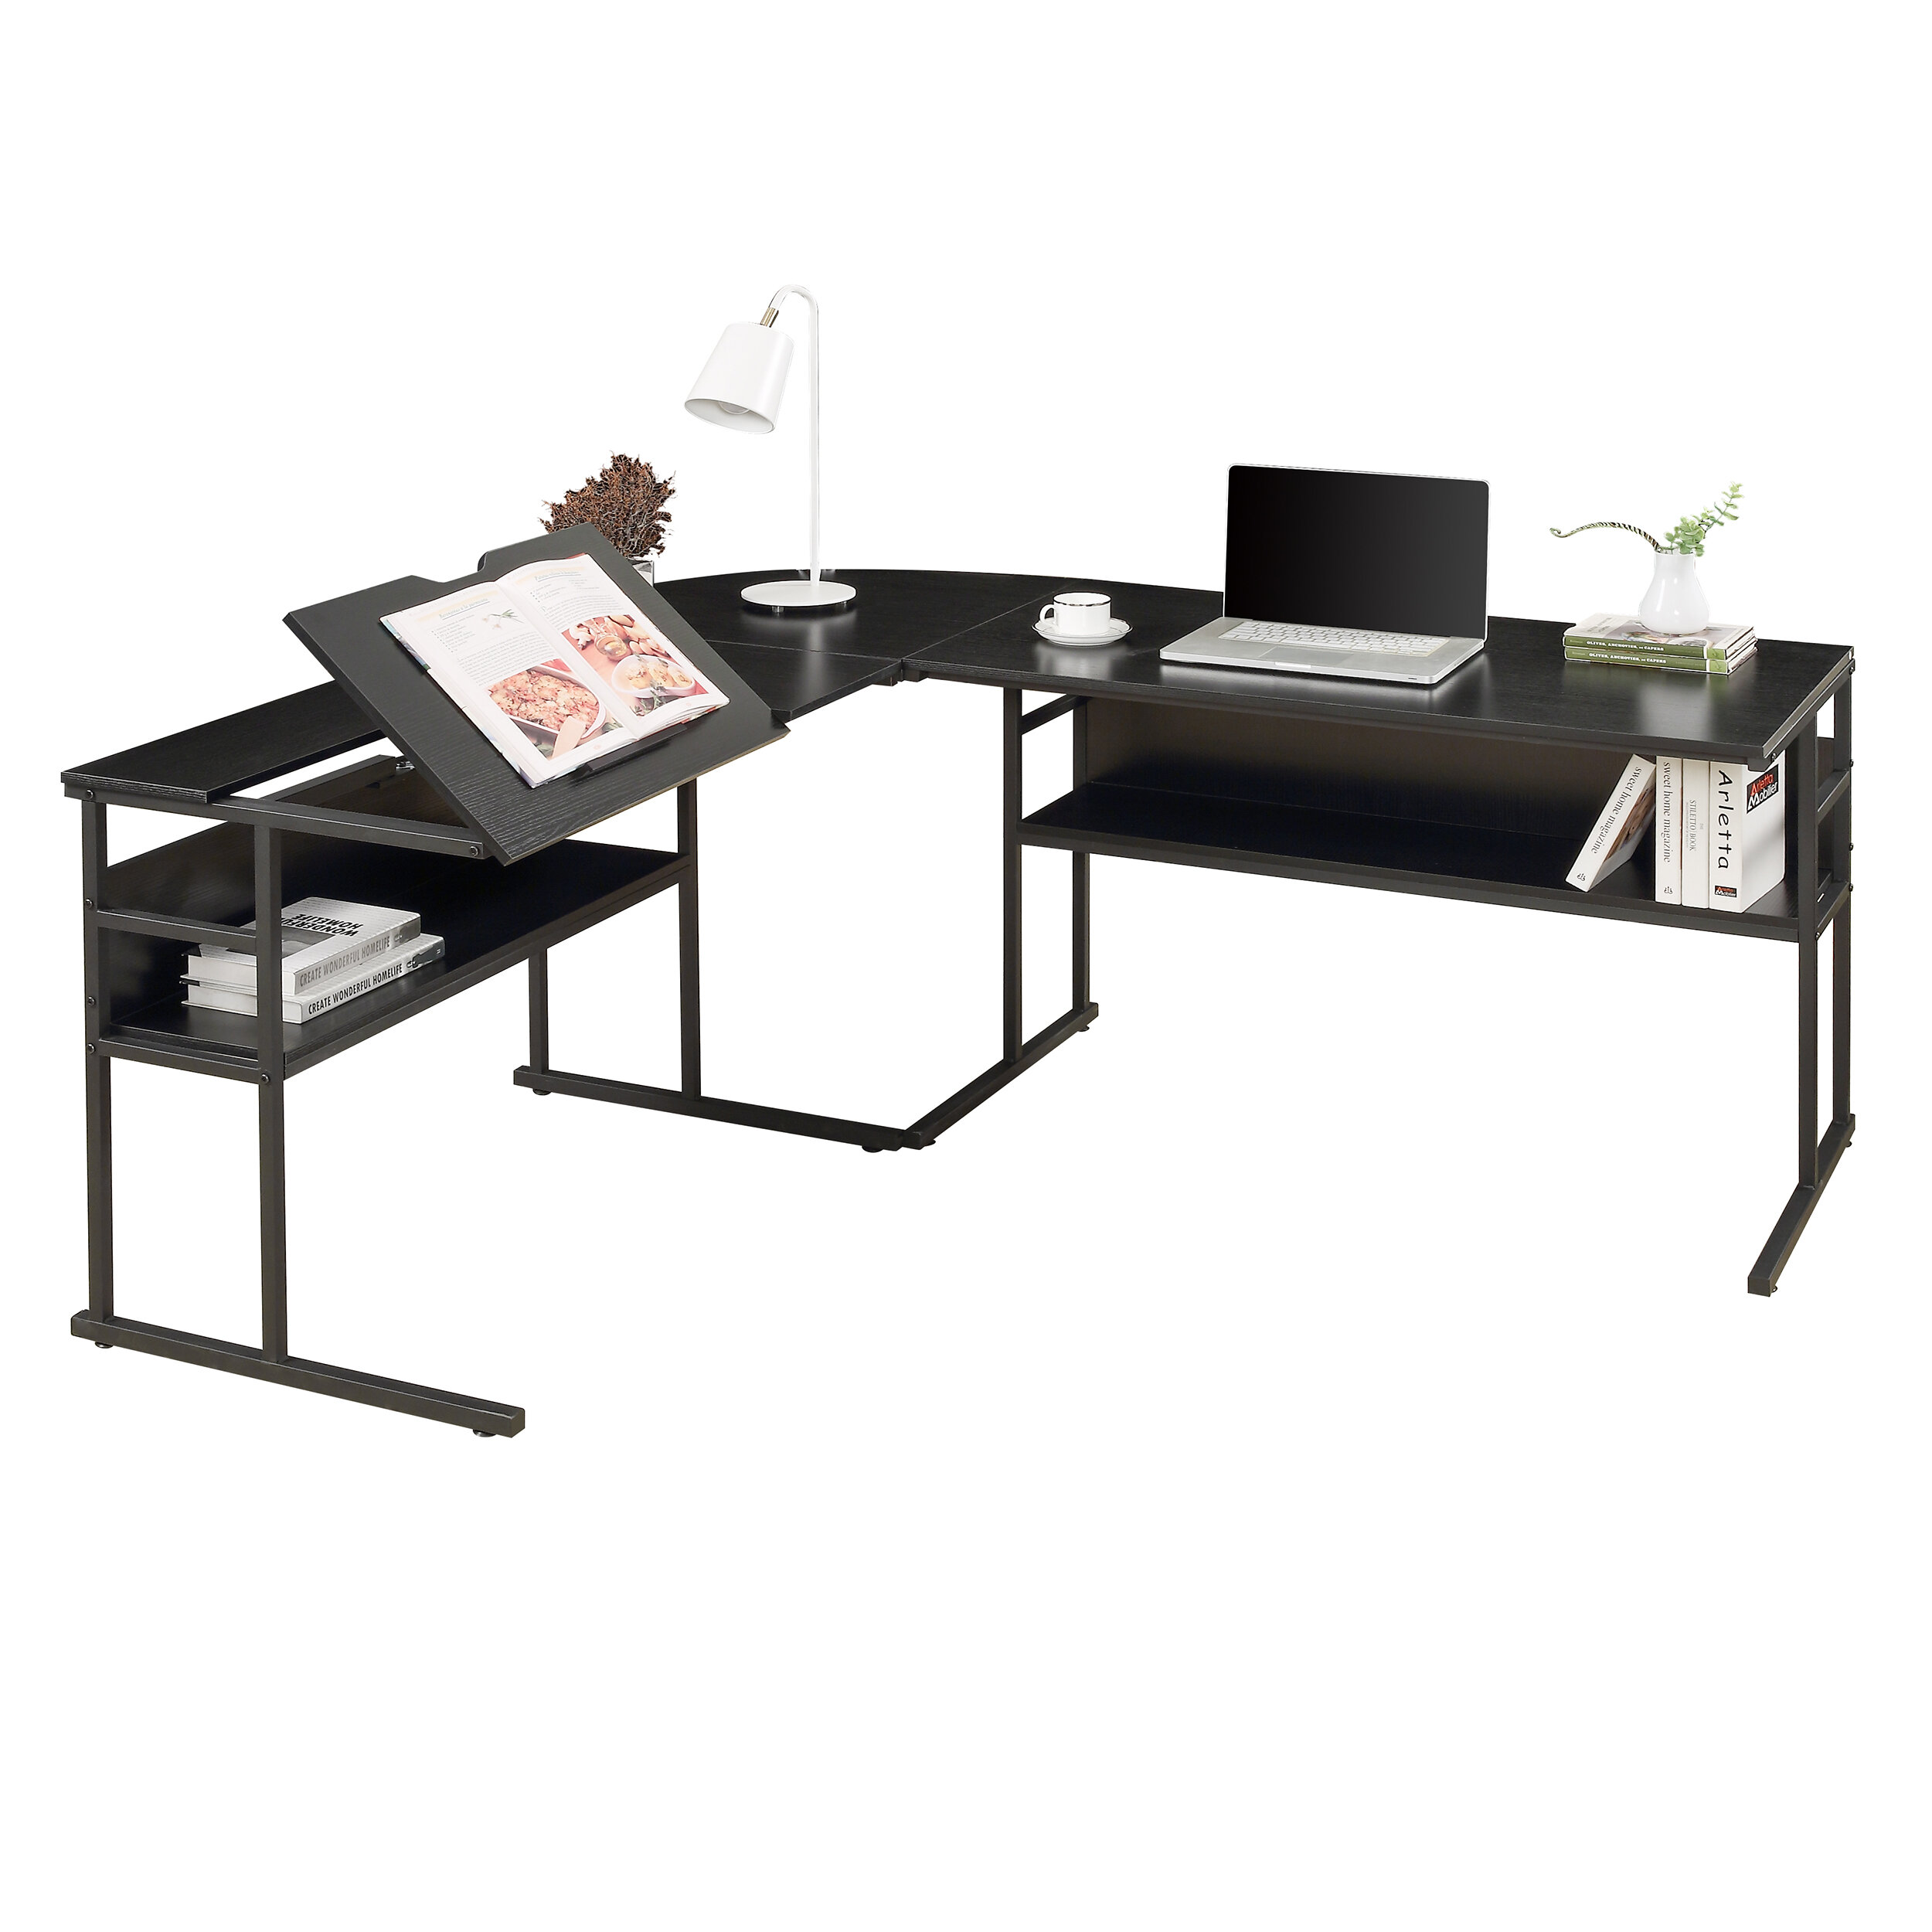 Details about   Computer Table Laptop Office Desk Study Table Simple Workstation With 2 Drawers 